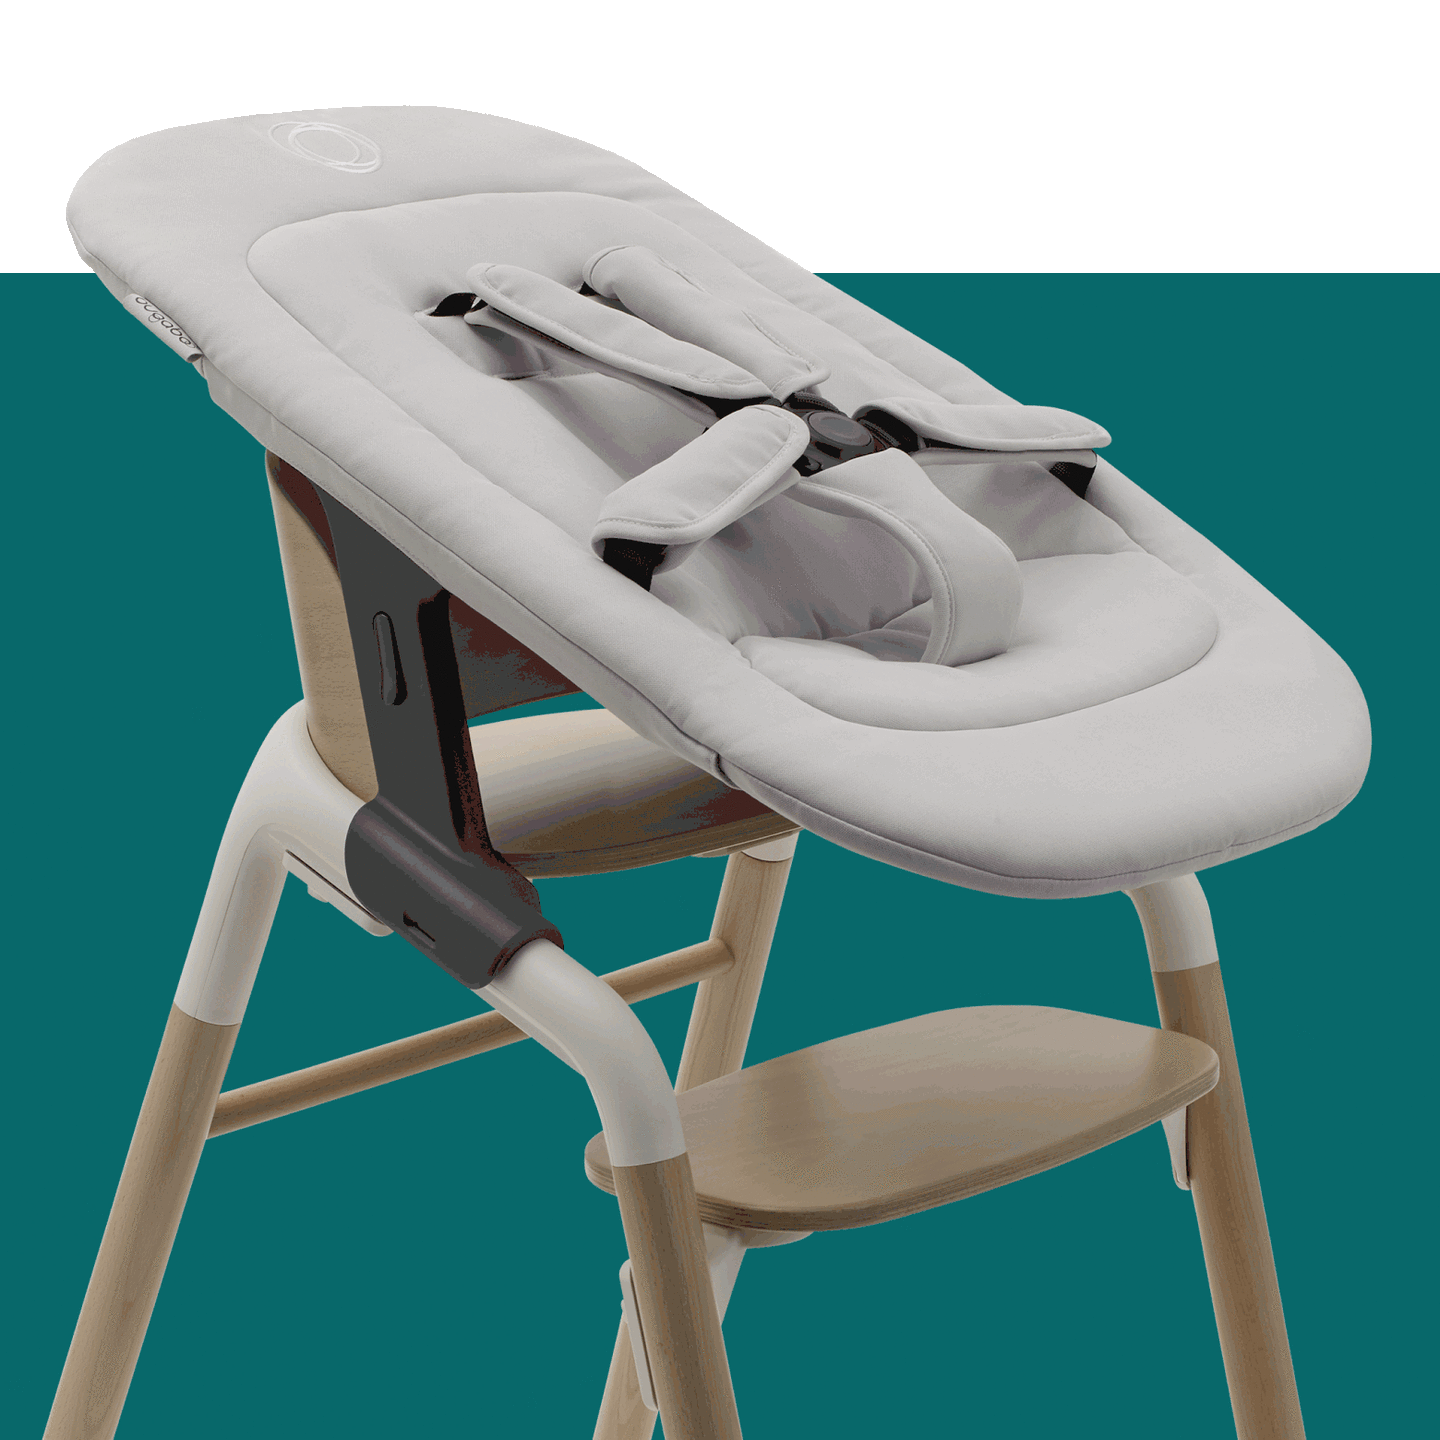 A GIF showcasing various set-ups of the Bugaboo Giraffe chair: with the newborn set, baby set, baby set with harness and tray, and the chair without any accessories.